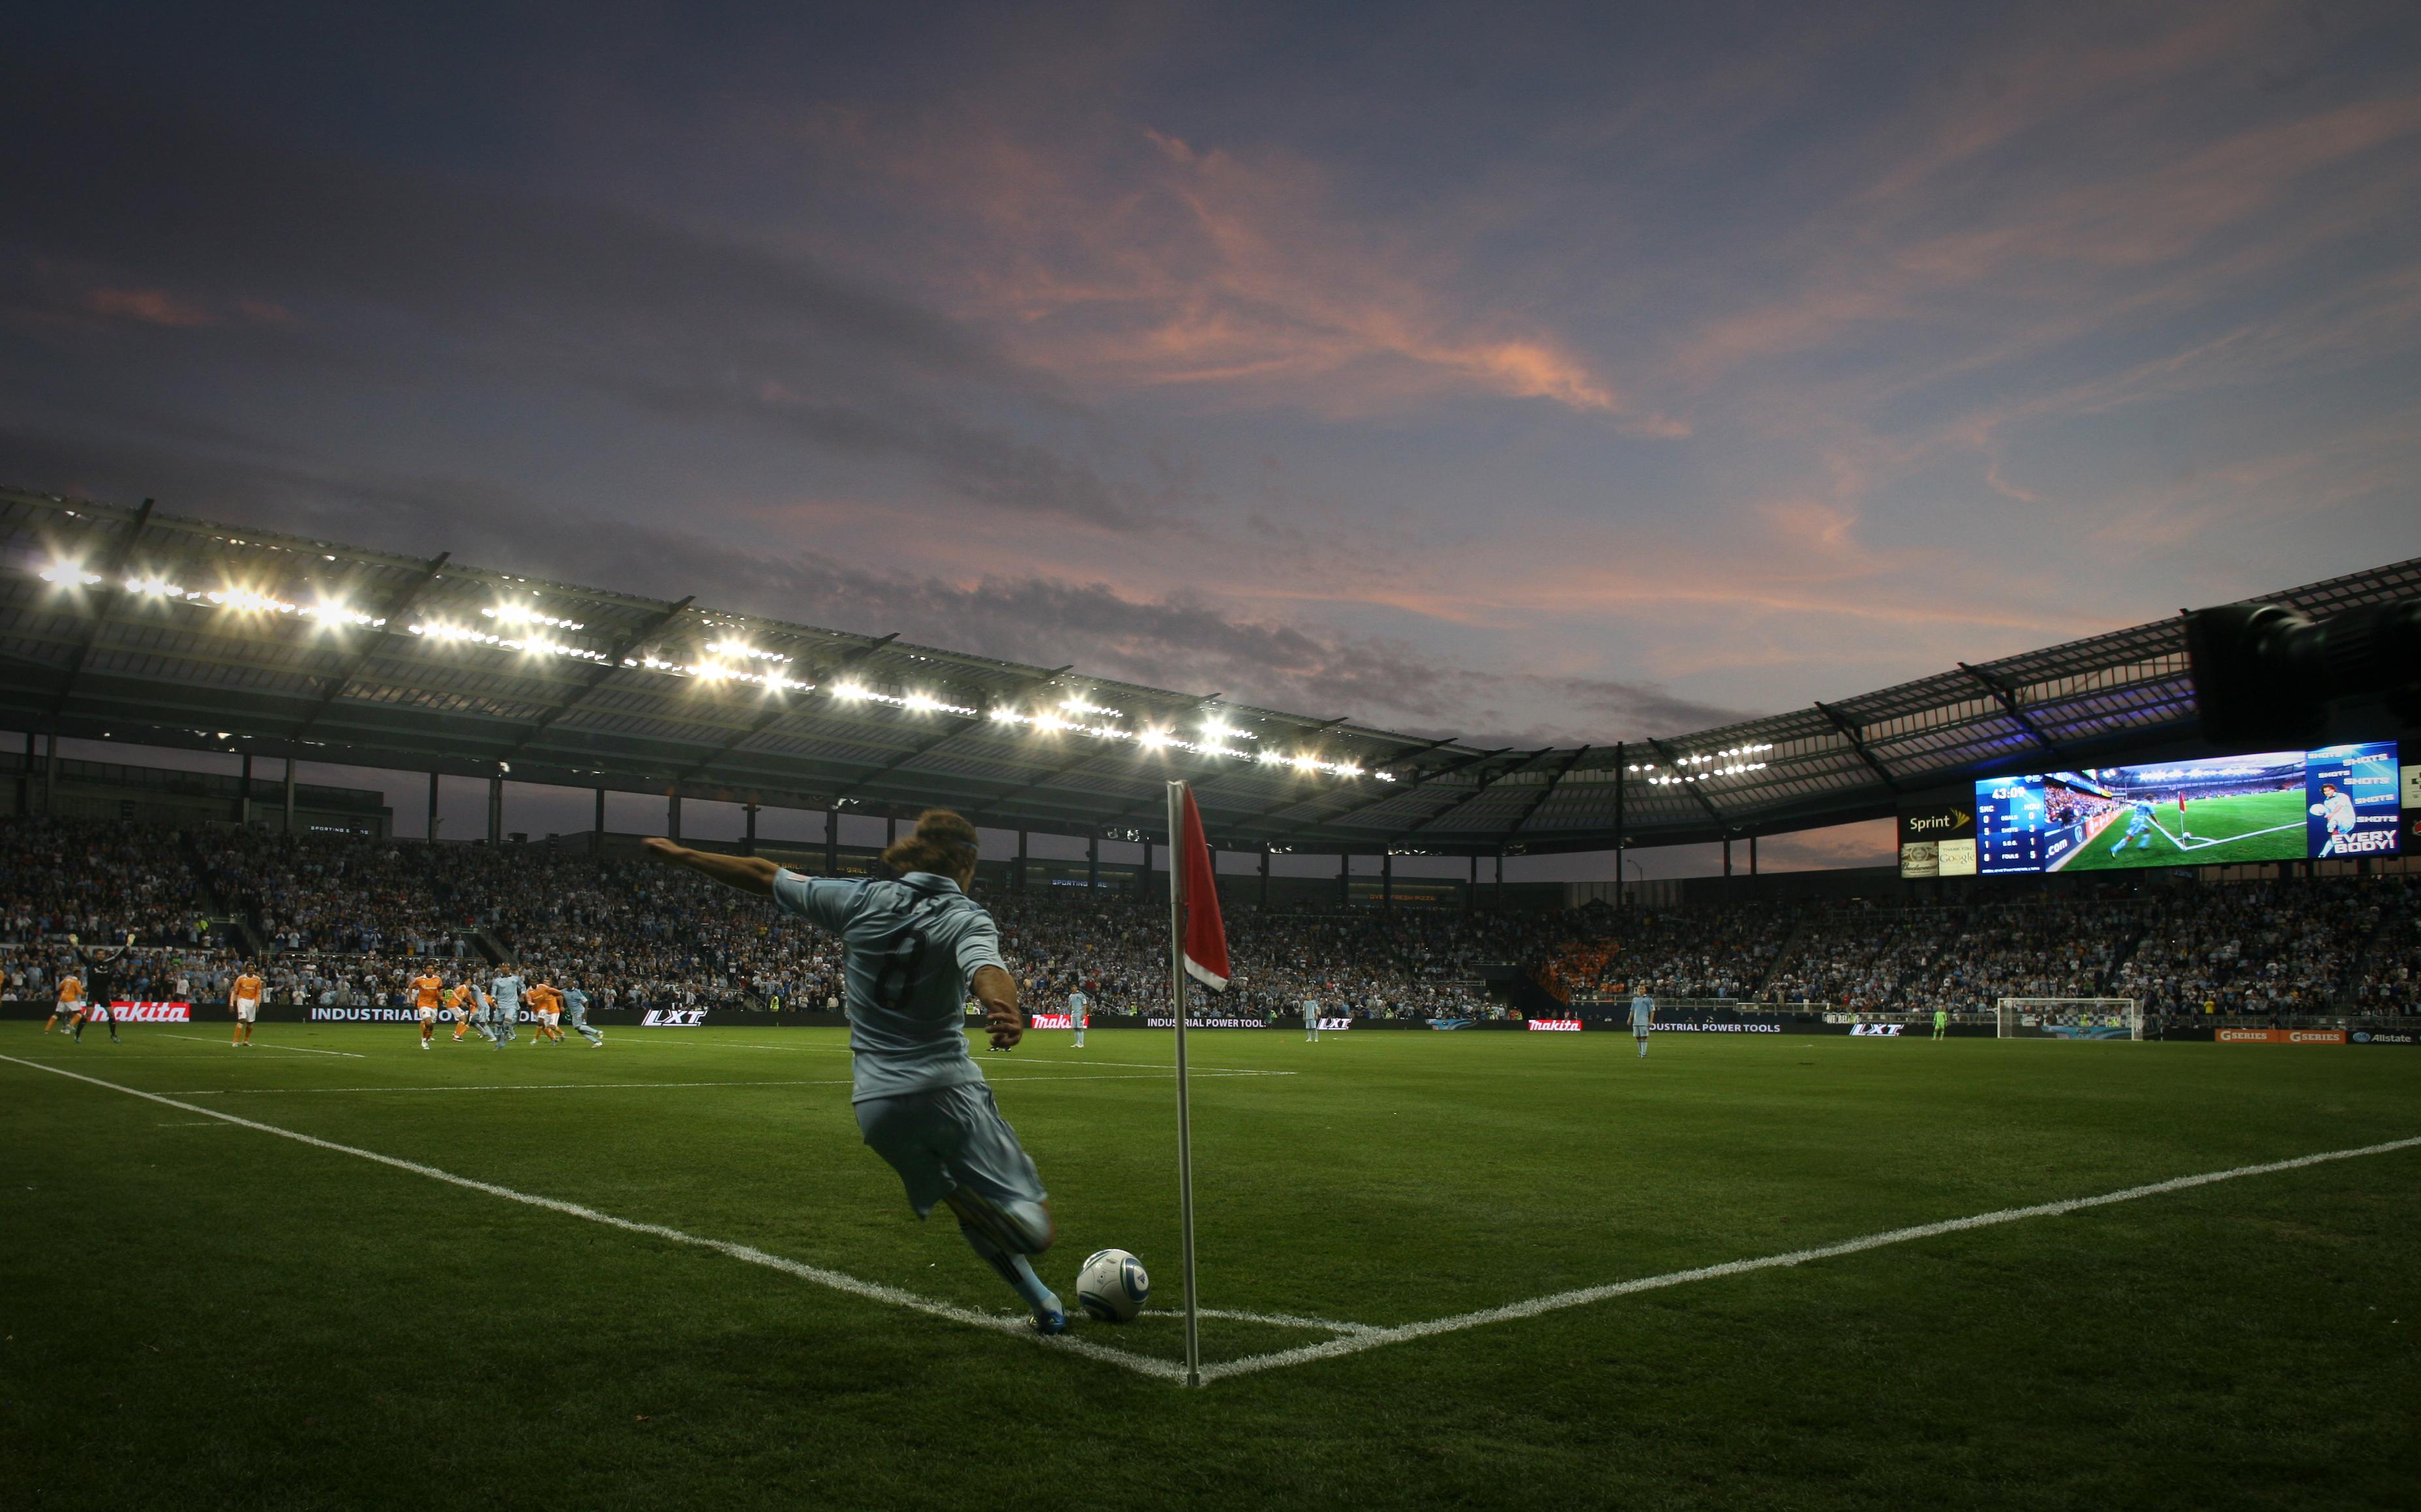 Free download Sporting Park Selected as Venue of the Year at